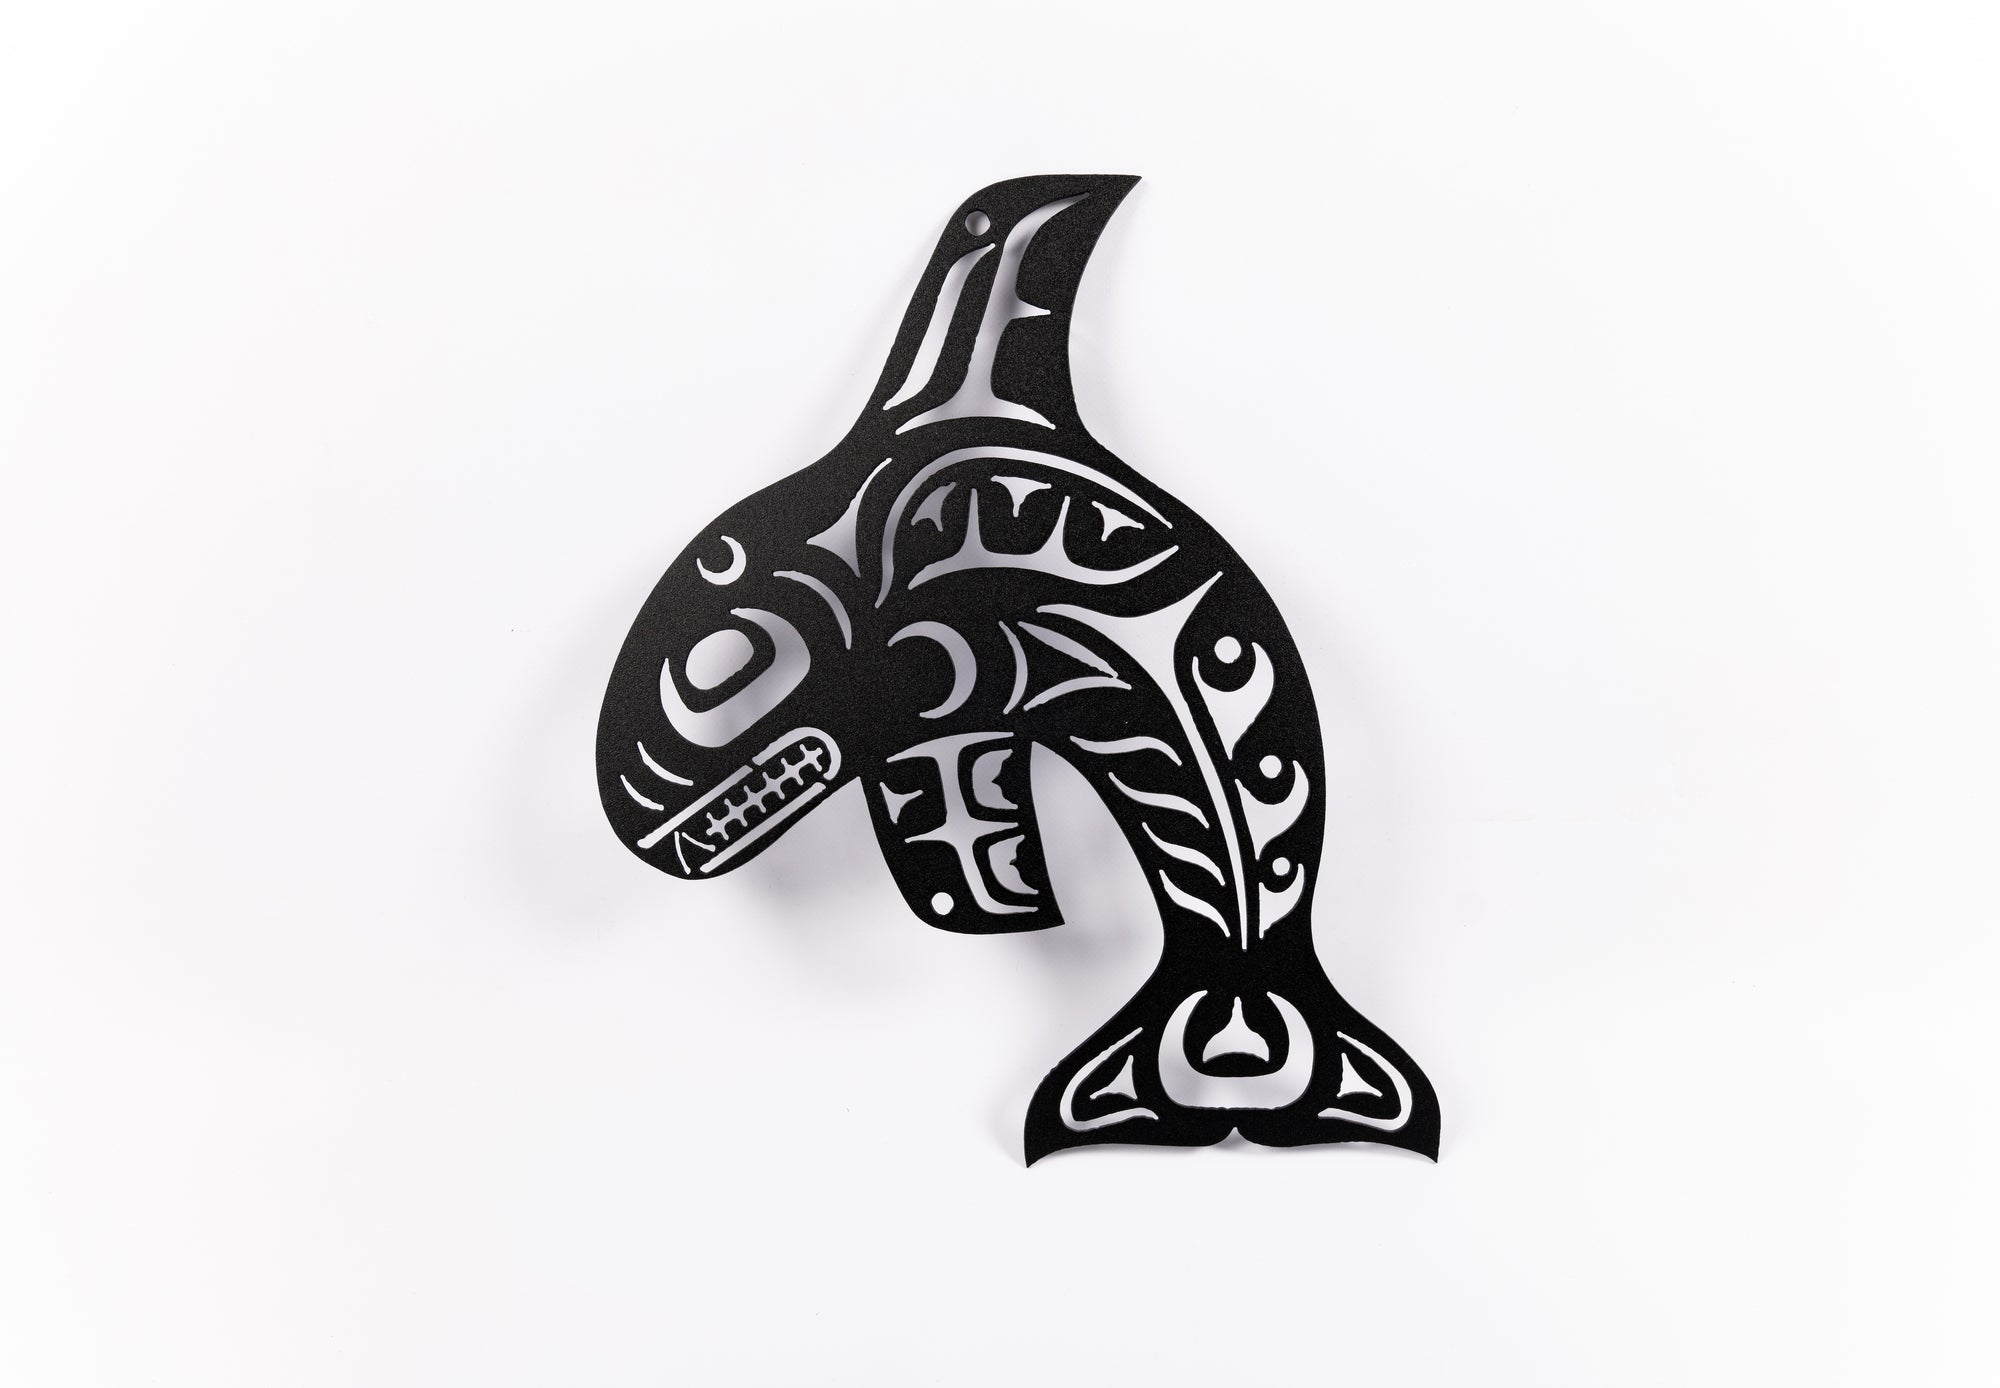 Trevor Husband Orca Native 24'' Black in colour - Trevor Husband Orca Native 24'' Black in colour -  - House of Himwitsa Native Art Gallery and Gifts